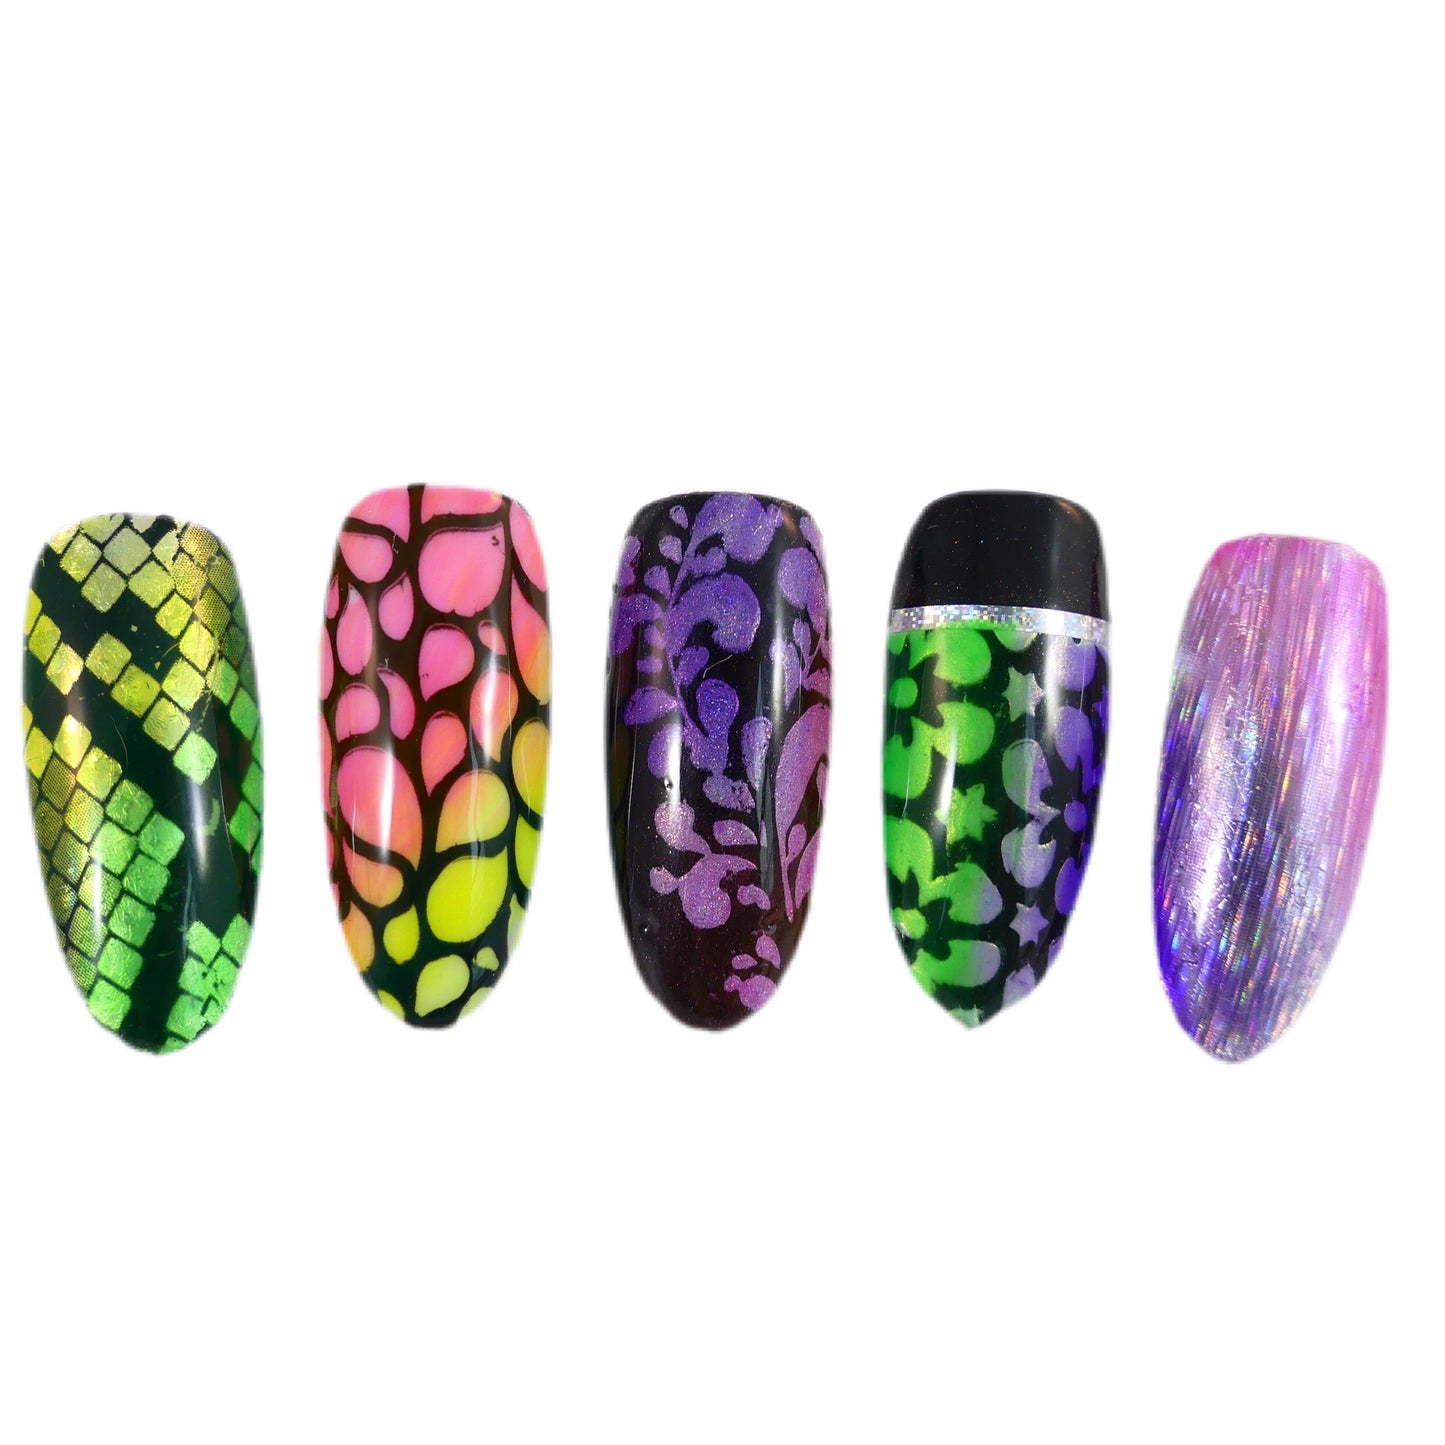 Load image into Gallery viewer, So Jelly Gel Polish - Yellow - My Little Nail Art Shop
